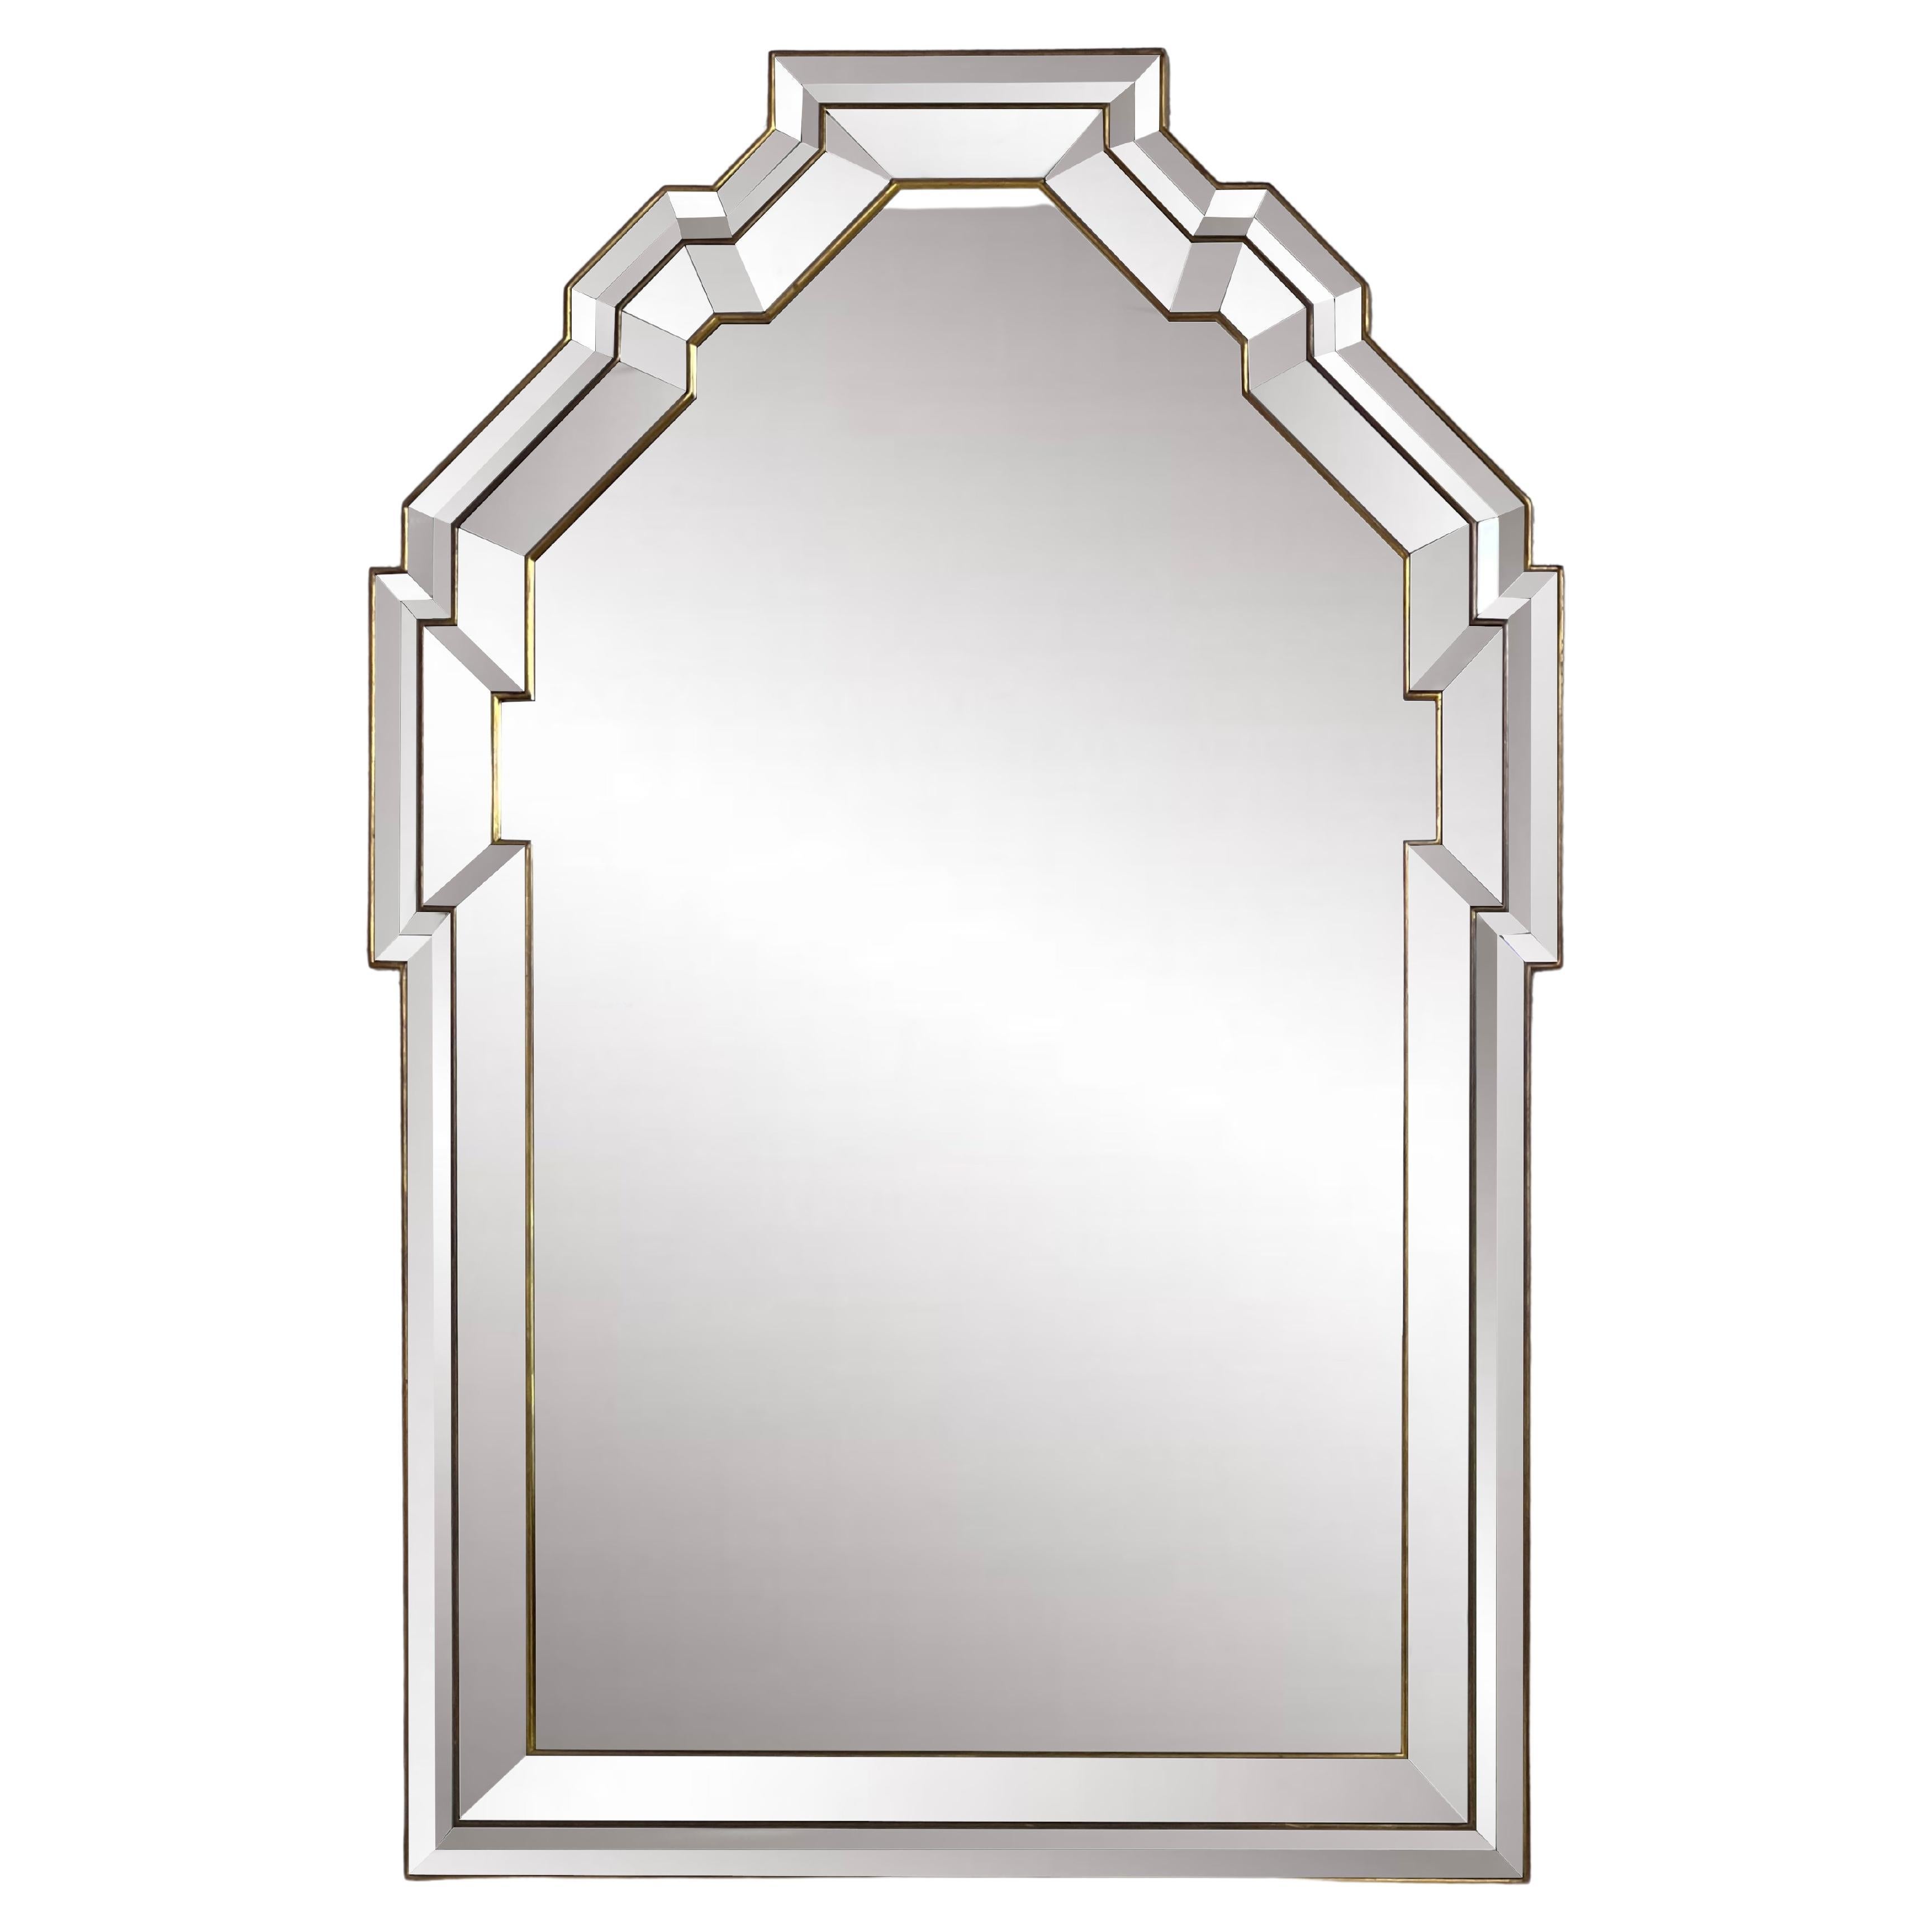 Art Deco Style And 1920s Design High-Quality Gilded Glazing Bead and Bevelled Mirror with high-quality craftmanship. It imposes by its size, its amazing Art Deco lines shape but also by the quality of its manufacture. In perfect condition.